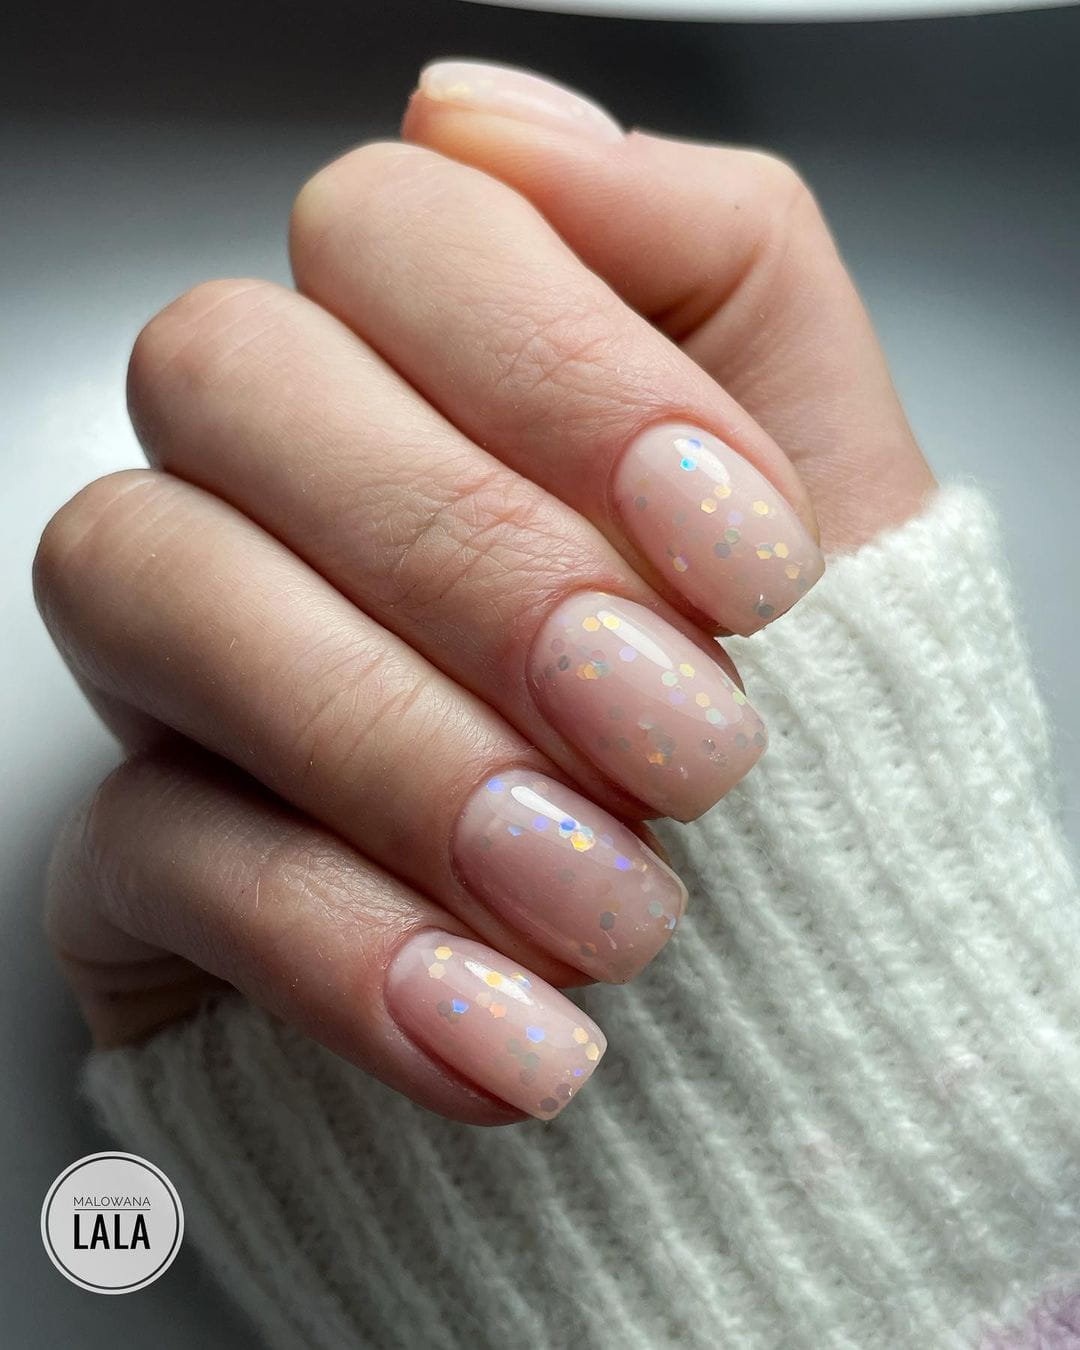 50+ Cute Short Nail Designs You’ll Want To Try Today images 39